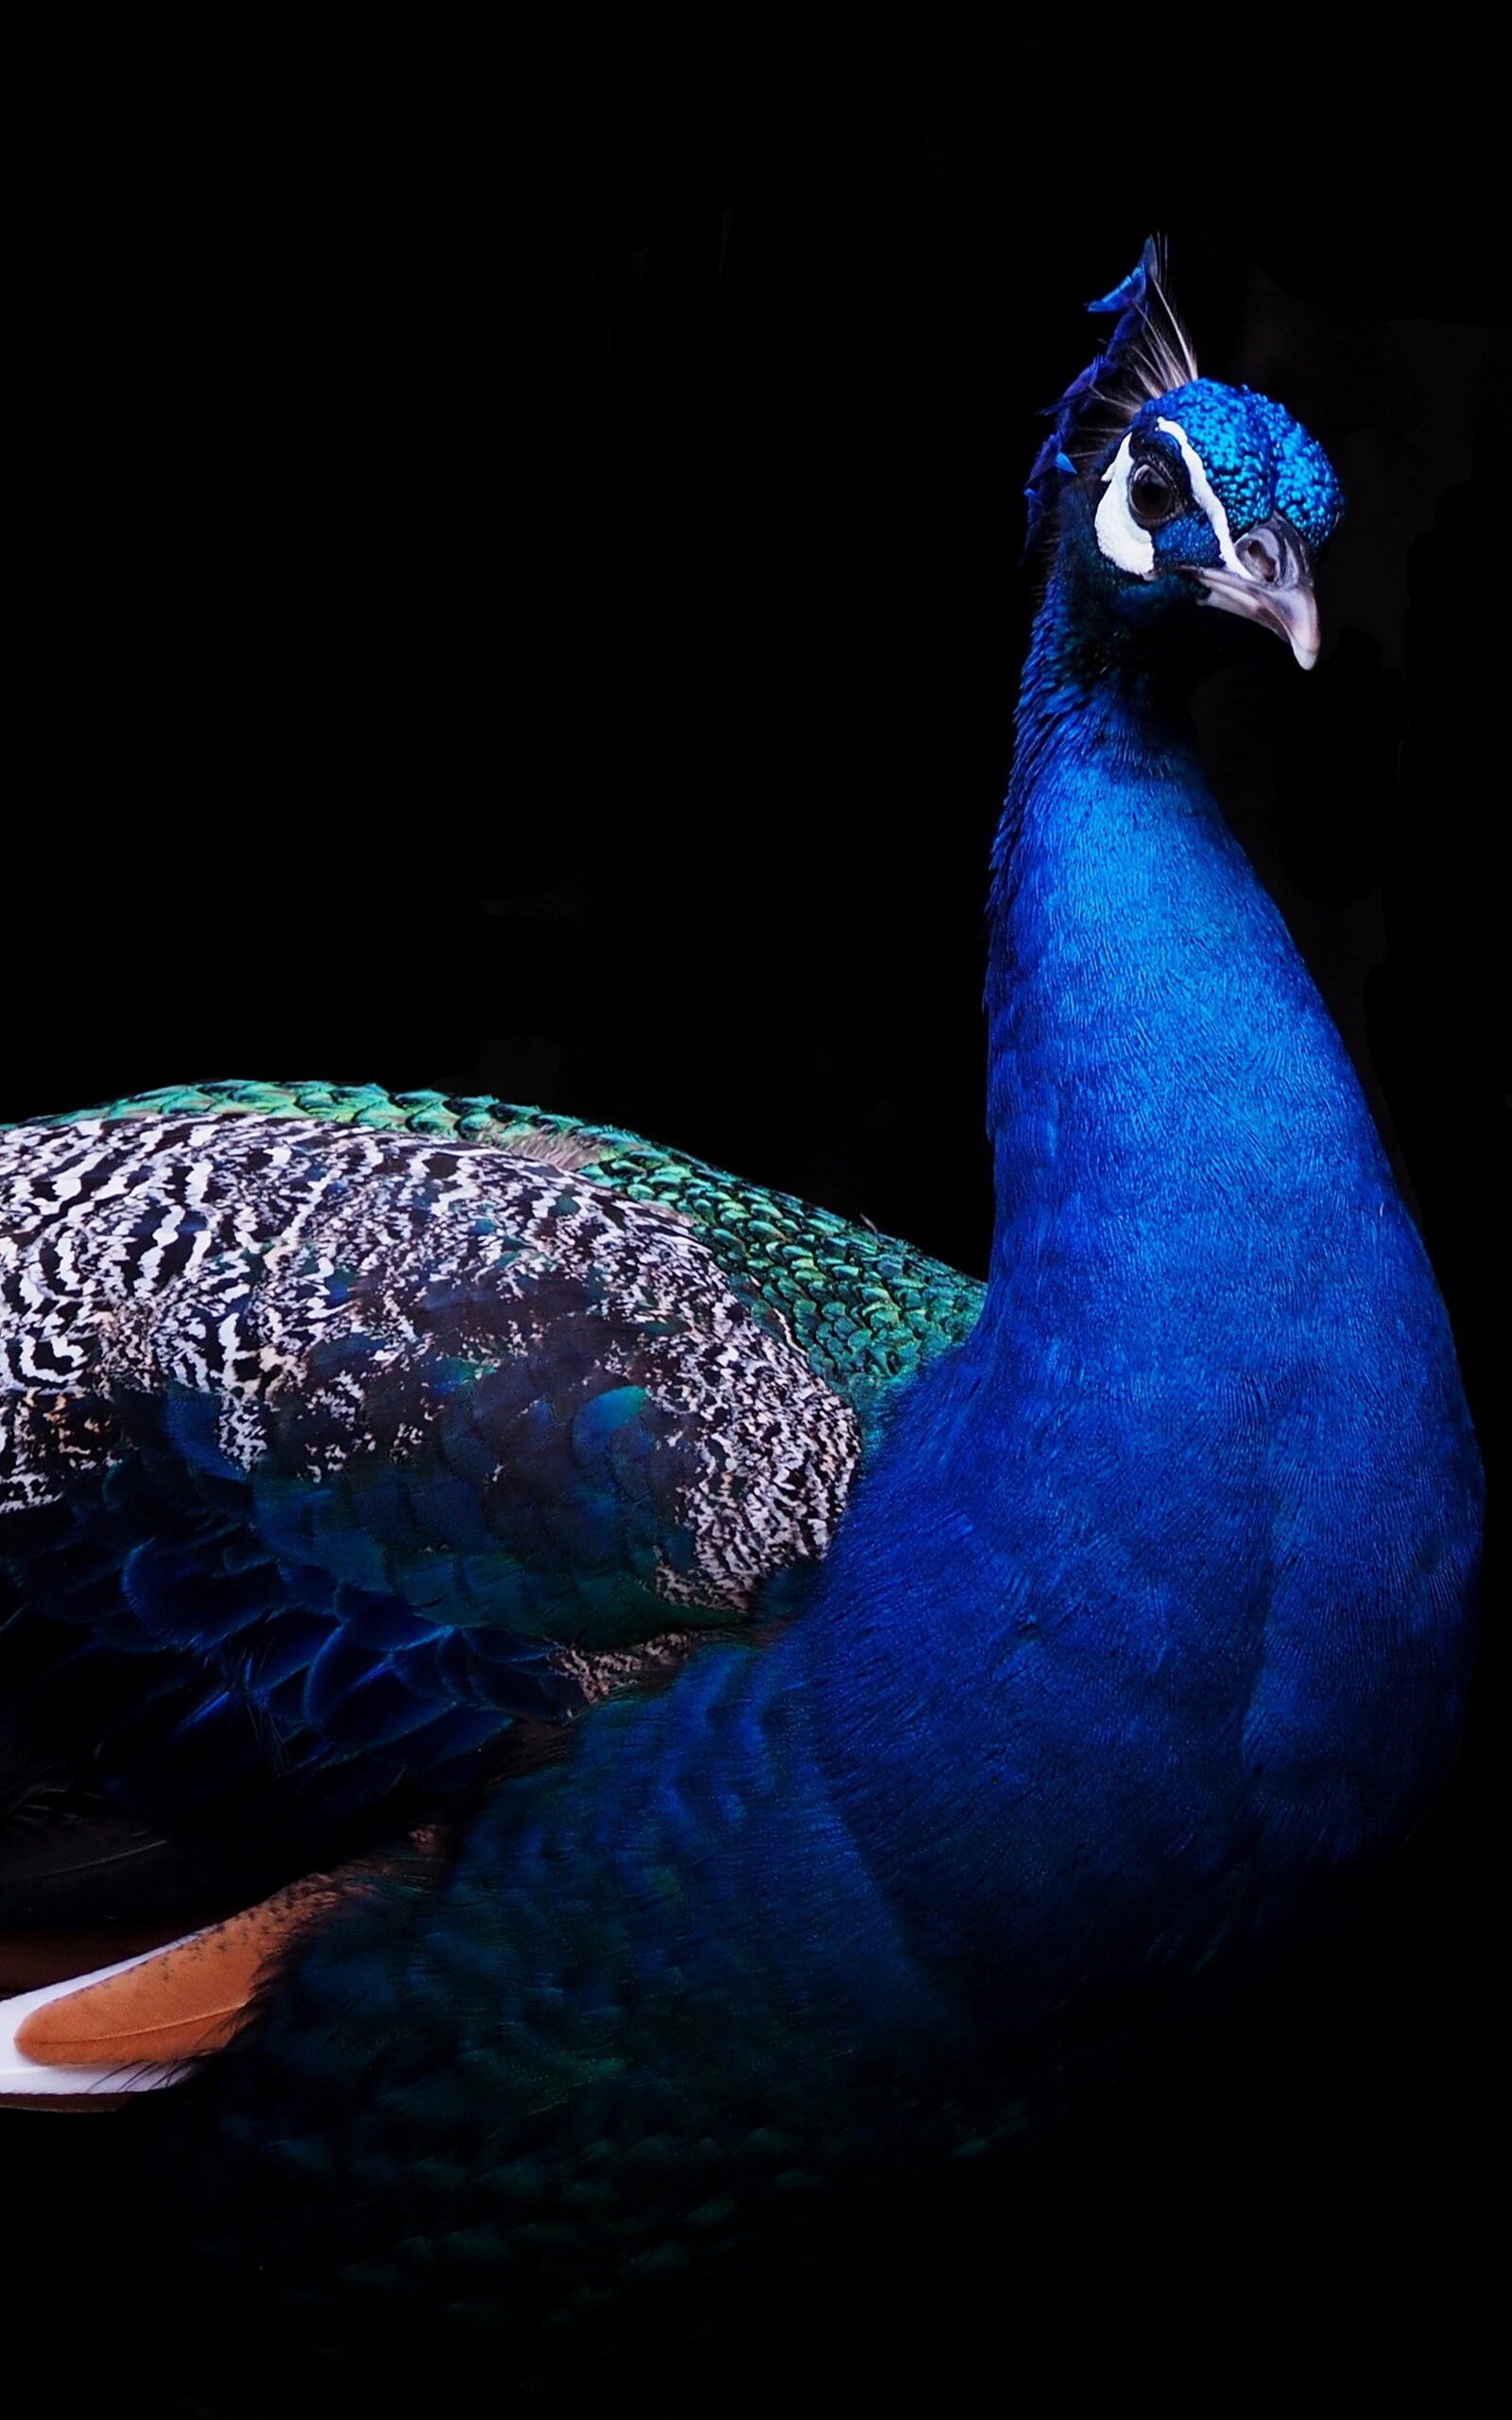 Peacock: The Indian Peafowl has iridescent blue and green plumage. 1600x2560 HD Wallpaper.